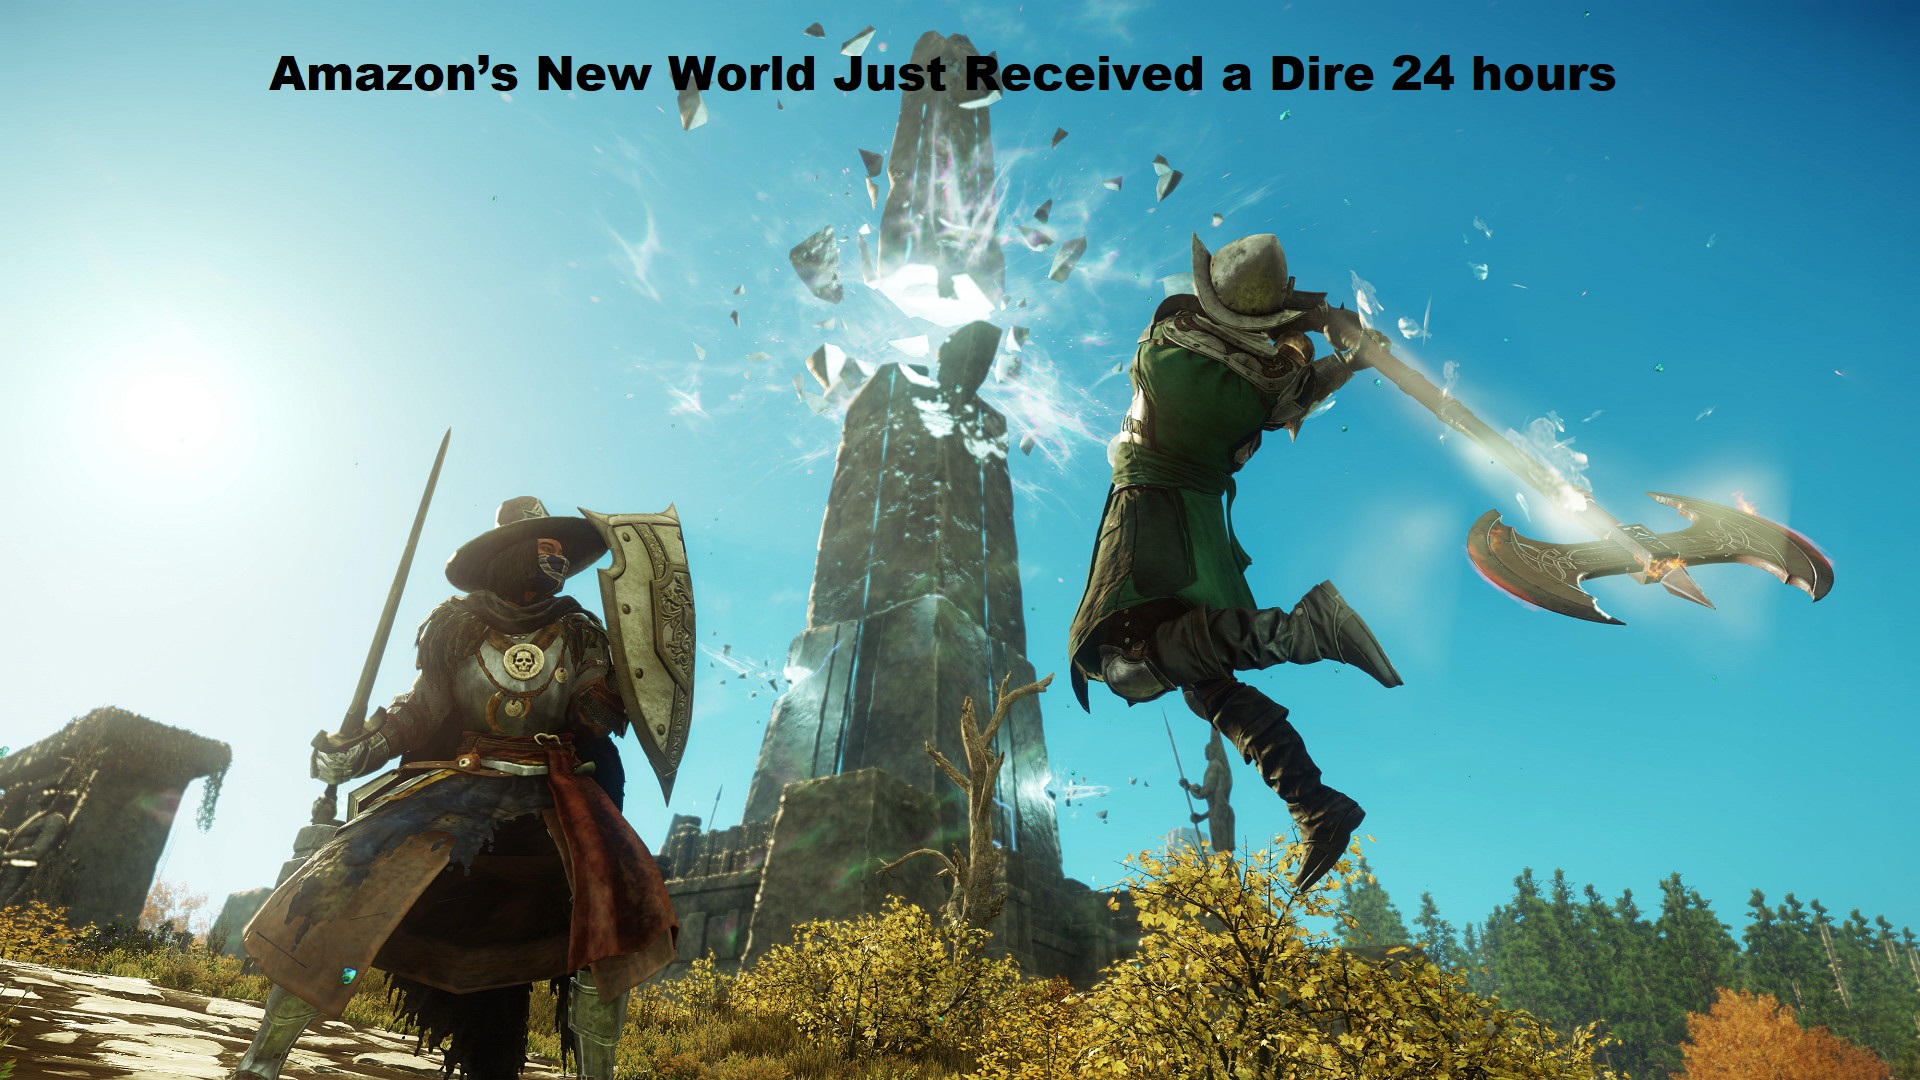 Amazon’s New World Just Received a Dire 24 hours 